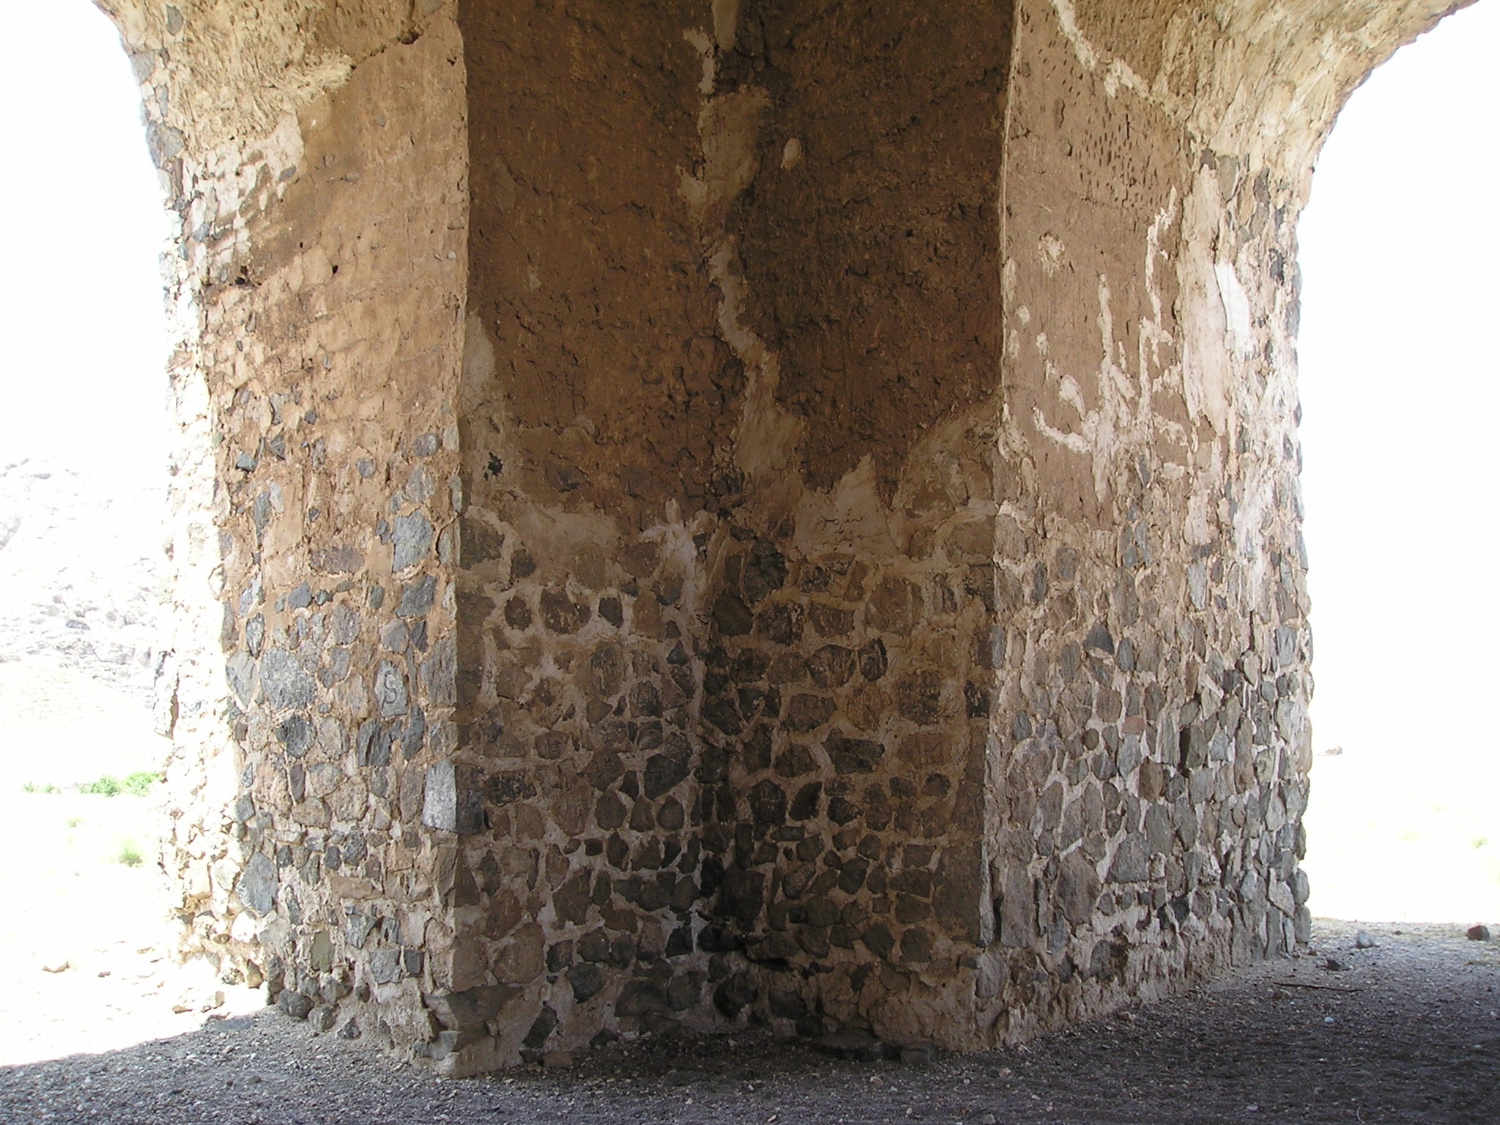 Interior detail of the base of the temple walls at the intersection of two piers